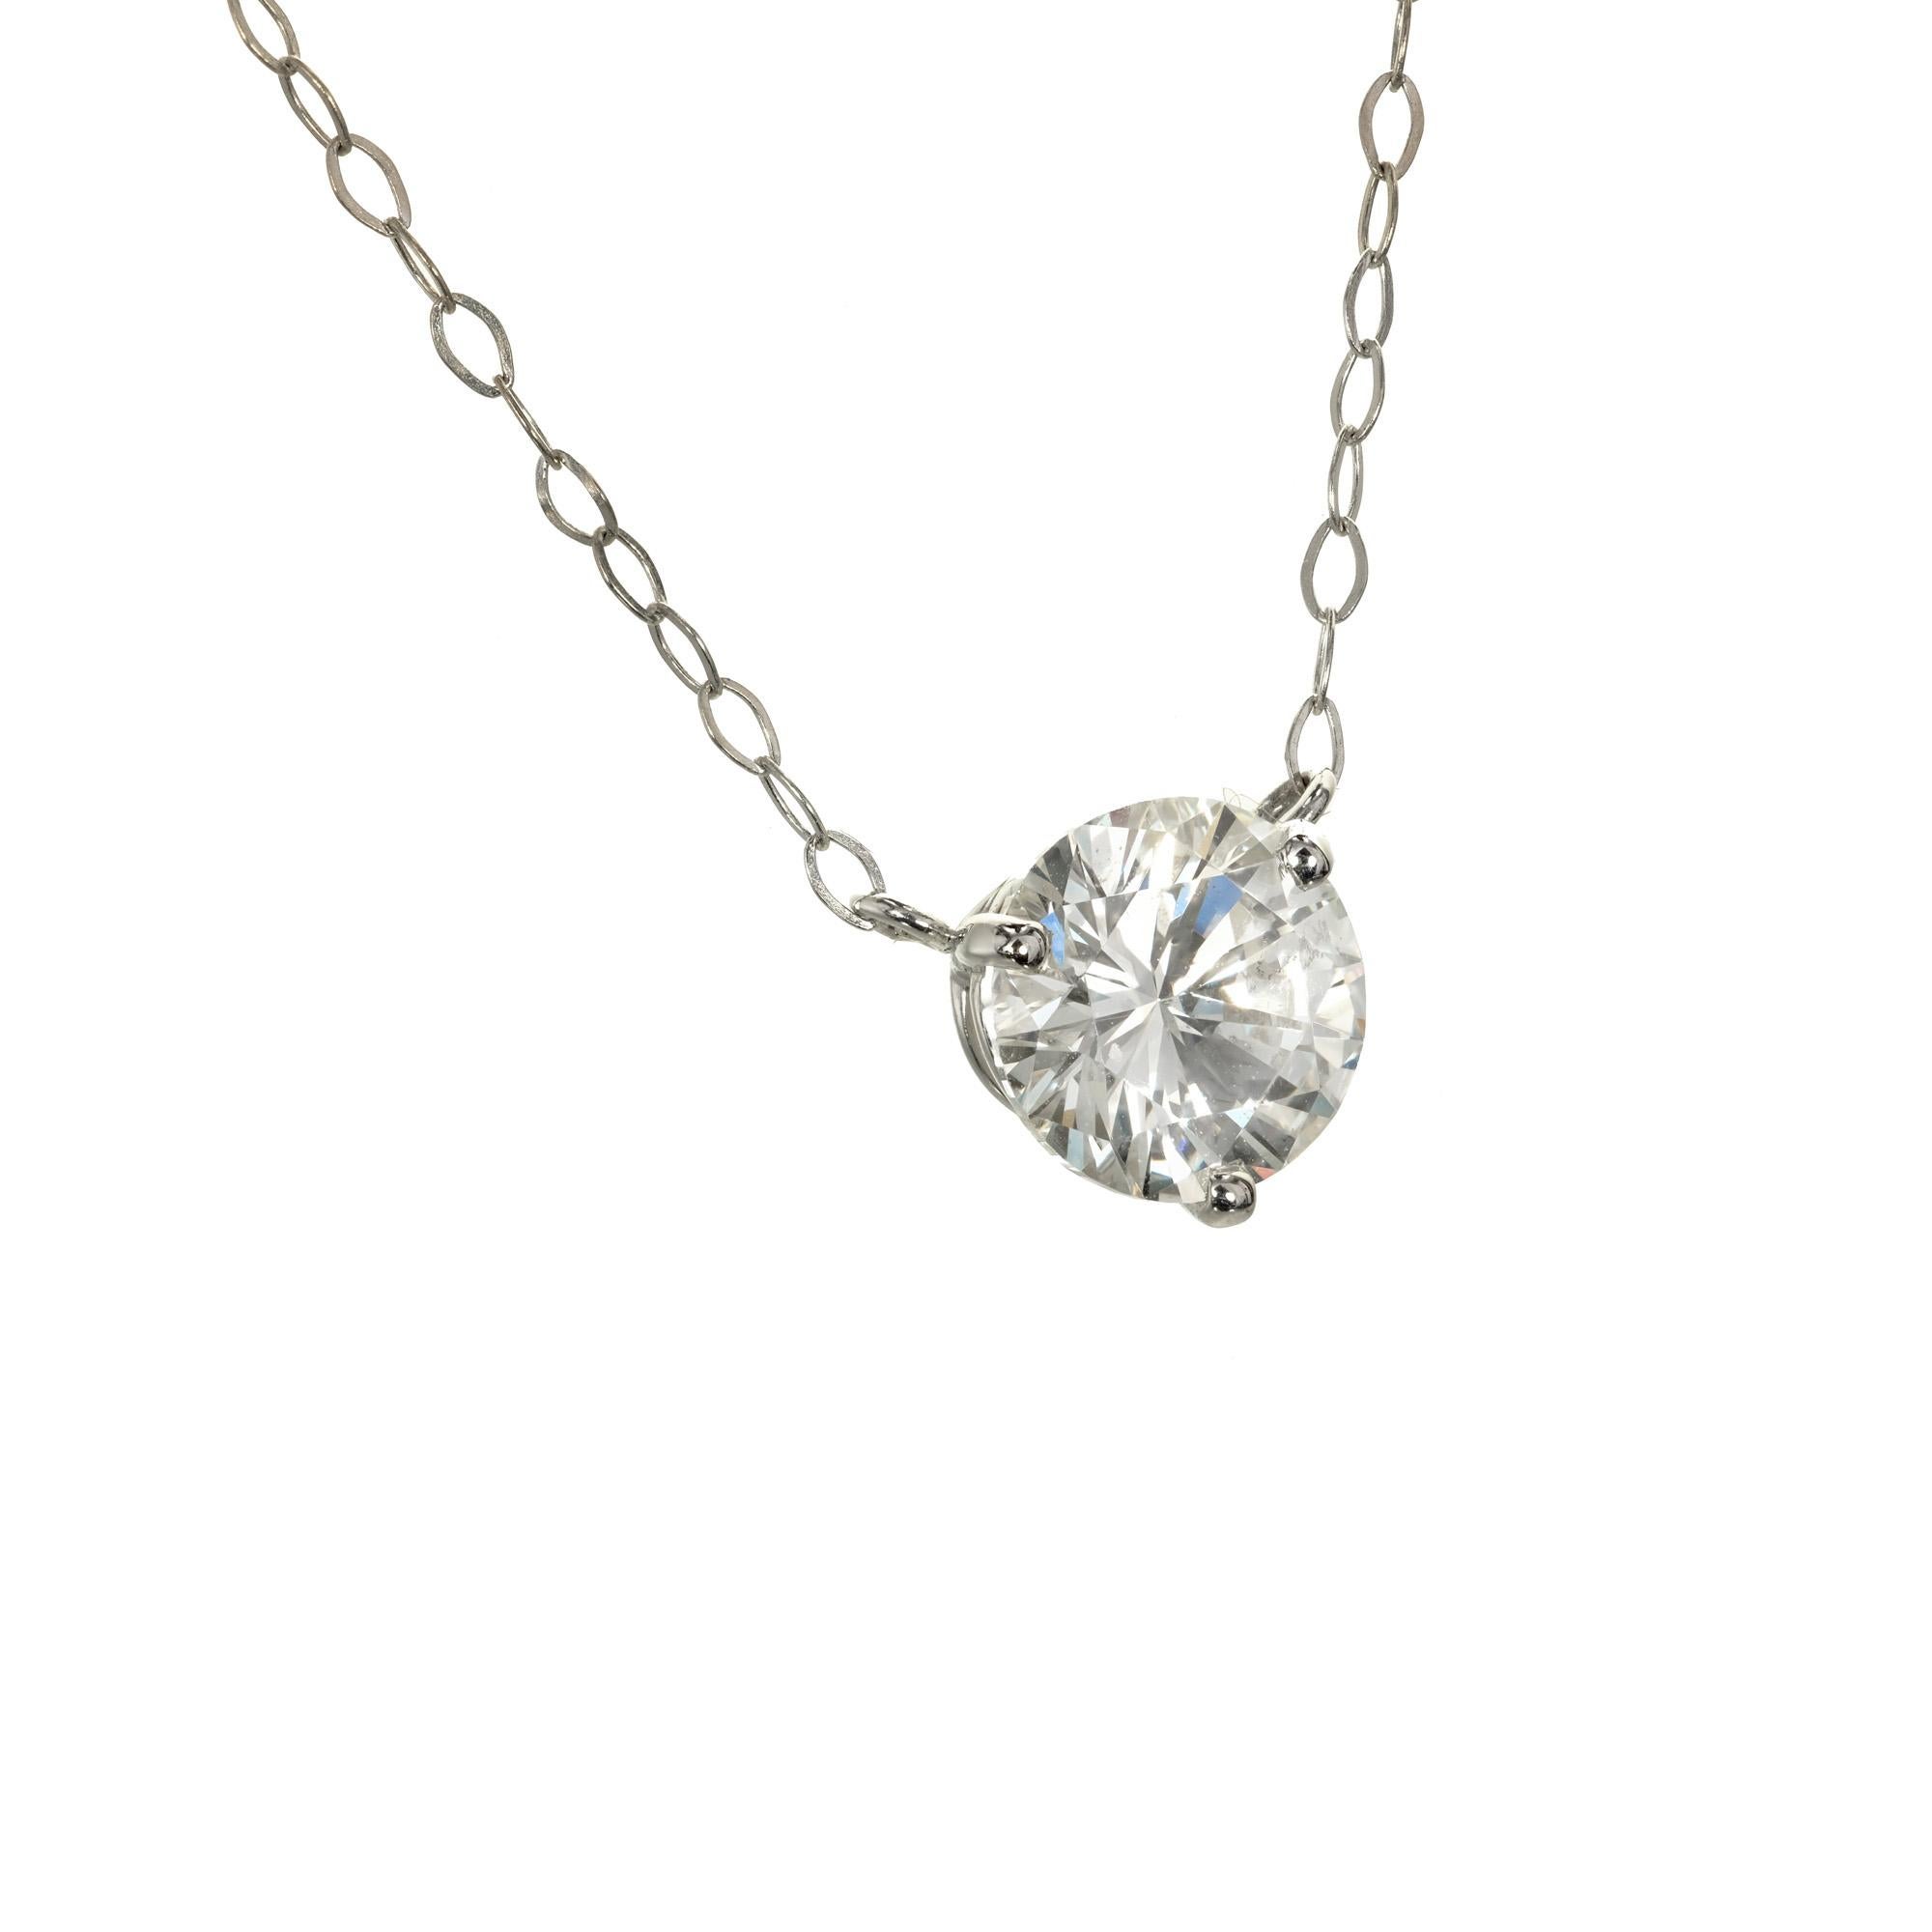 1.51 carat solitaire round diamond pendant necklace. The EGL Certified diamond is set in a classic platinum pendant. Created in the Peter Suchy Workshop

1 round brilliant H-I VS2 diamond, Approximate 1.51 carat. EGL Certificate #